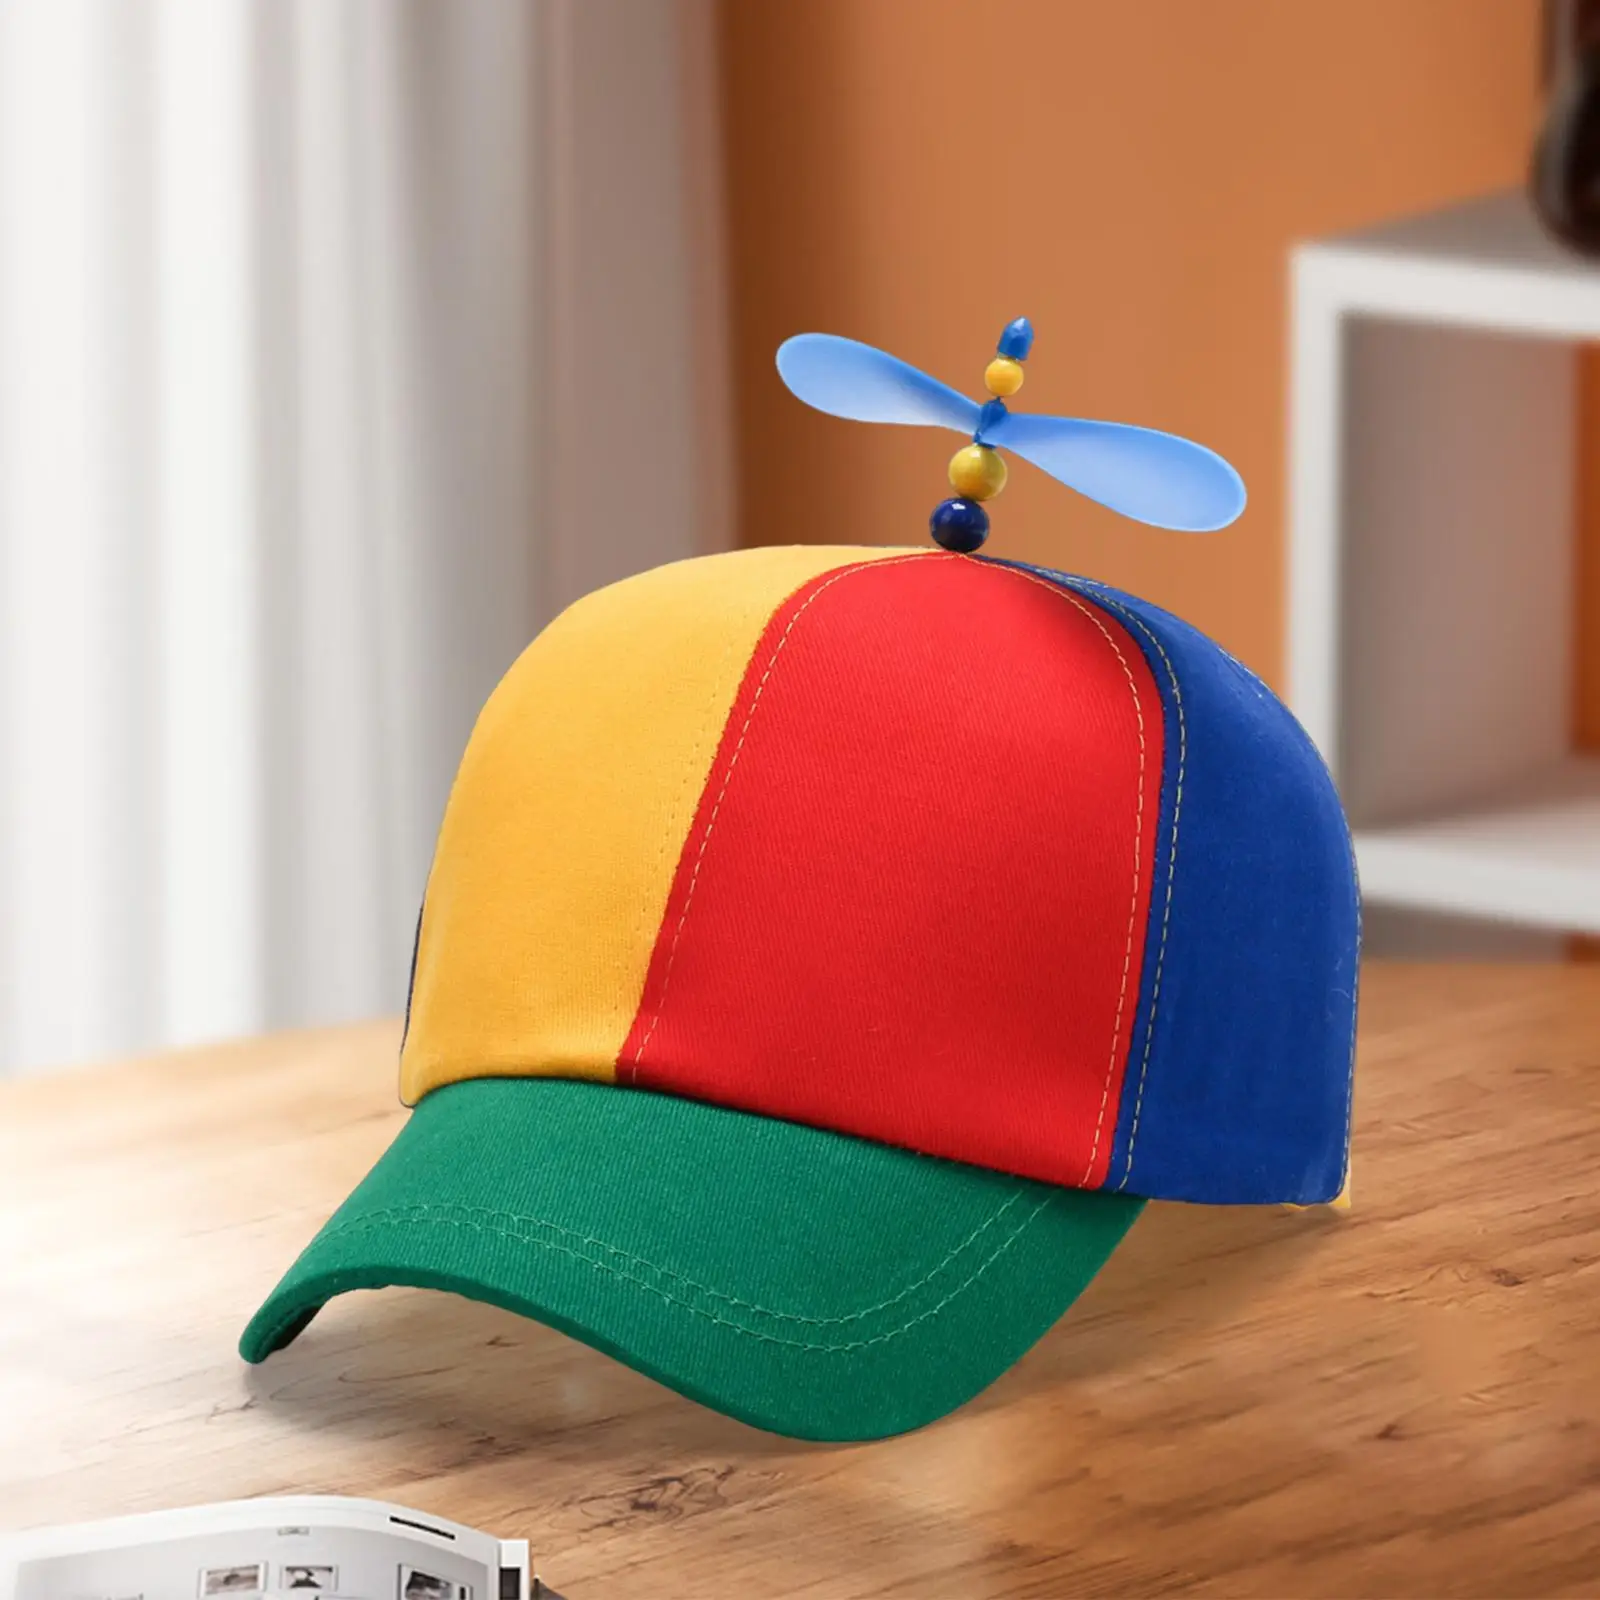 Colorful Propeller Hat, Decoration Party Hat Funny Novelty Fashion Baseball Hat for Daily Wear Outdoor Travel Sports Adult